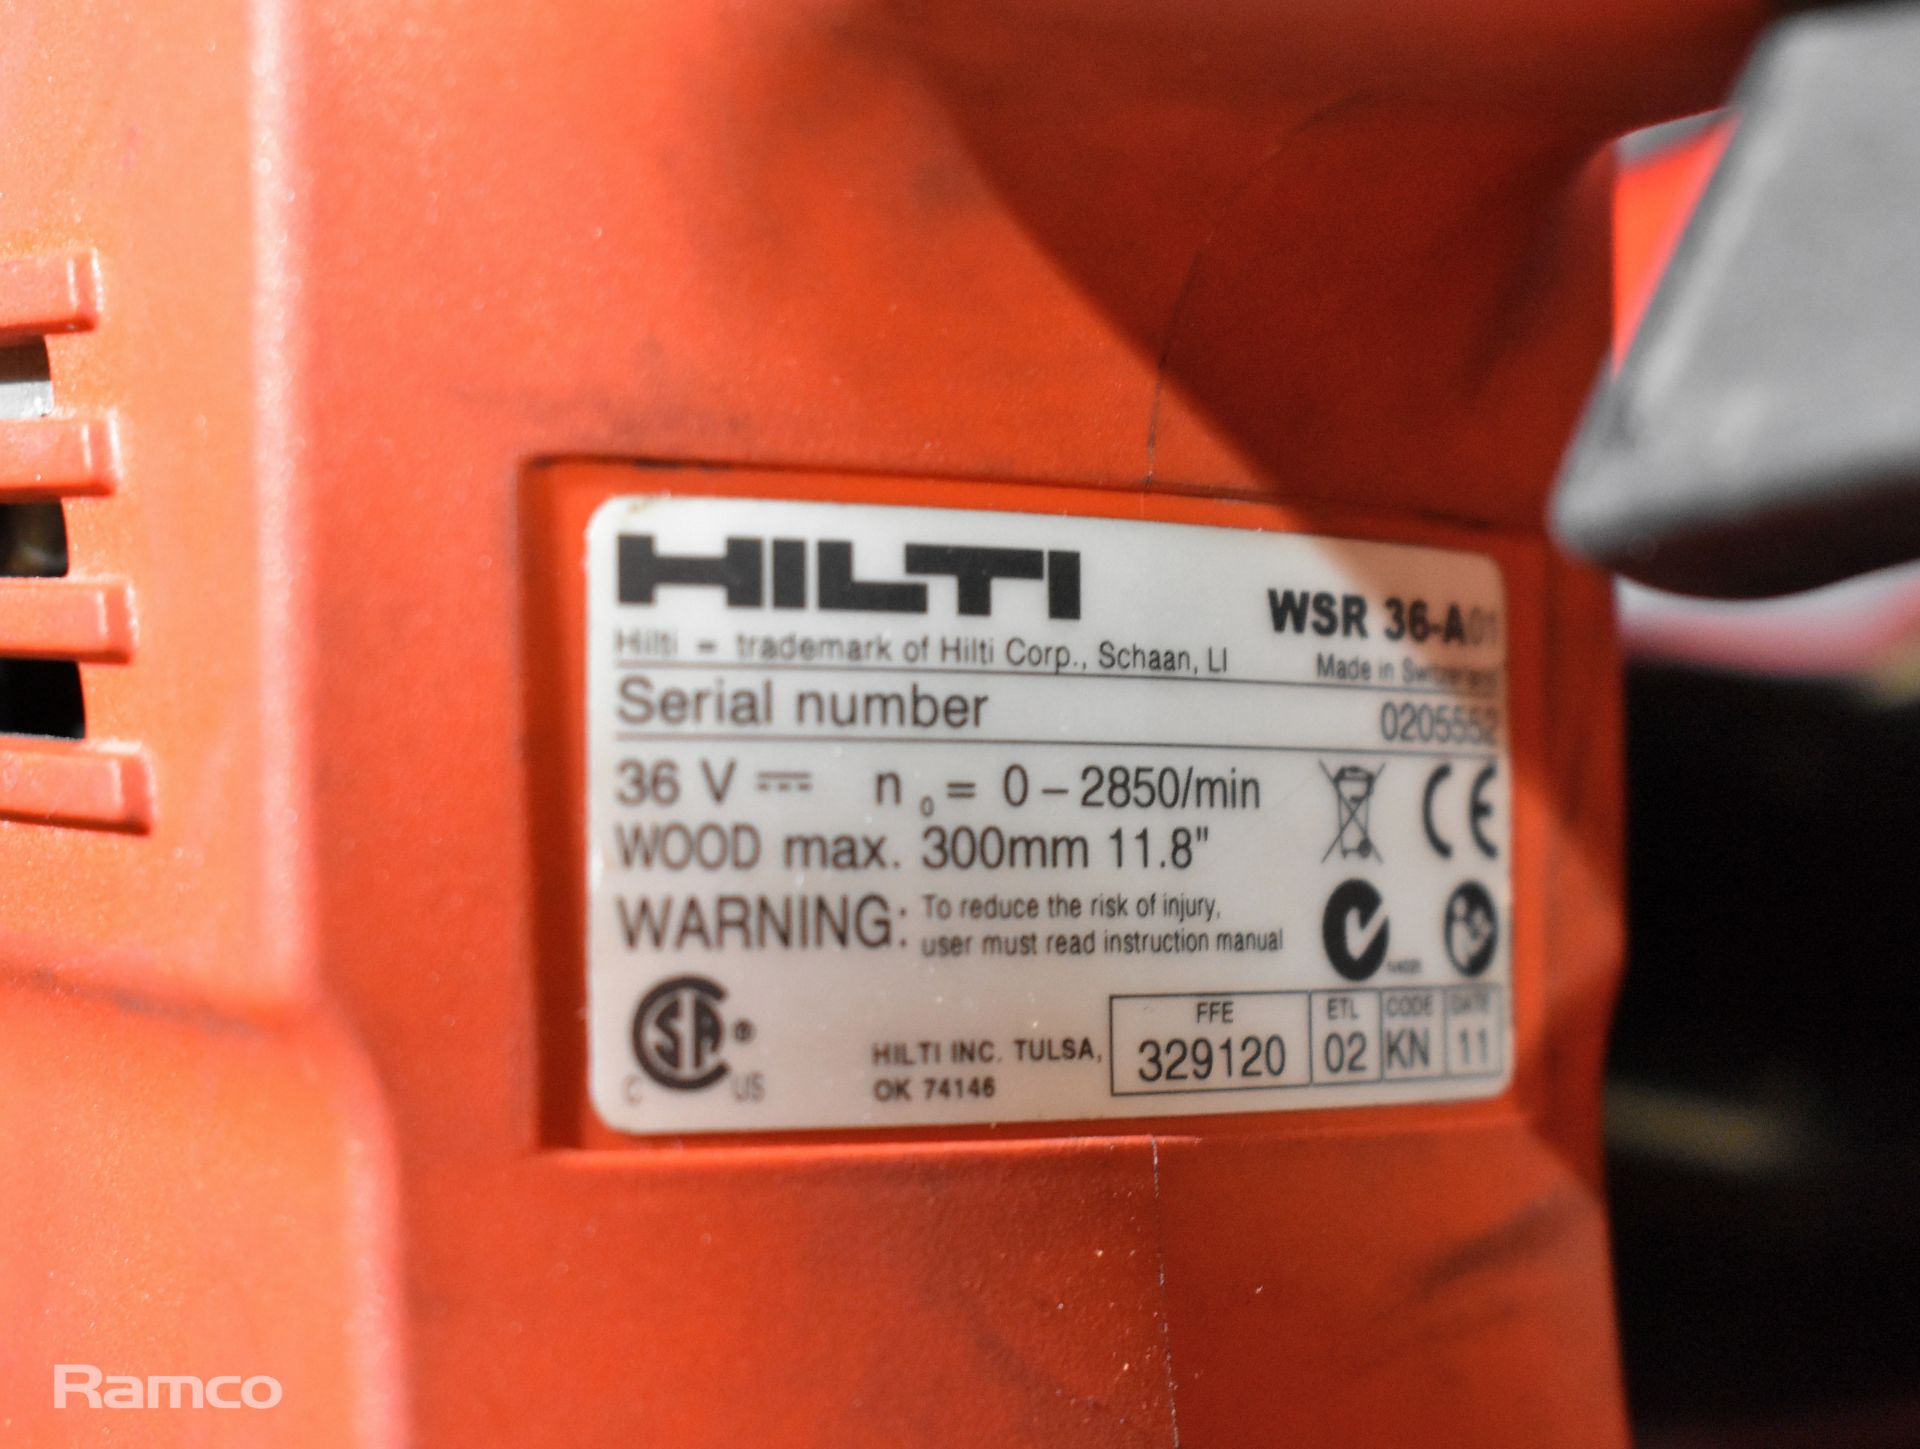 HILTI WSR 36-A heavy duty reciprocating saw in hard carry case - Image 4 of 5